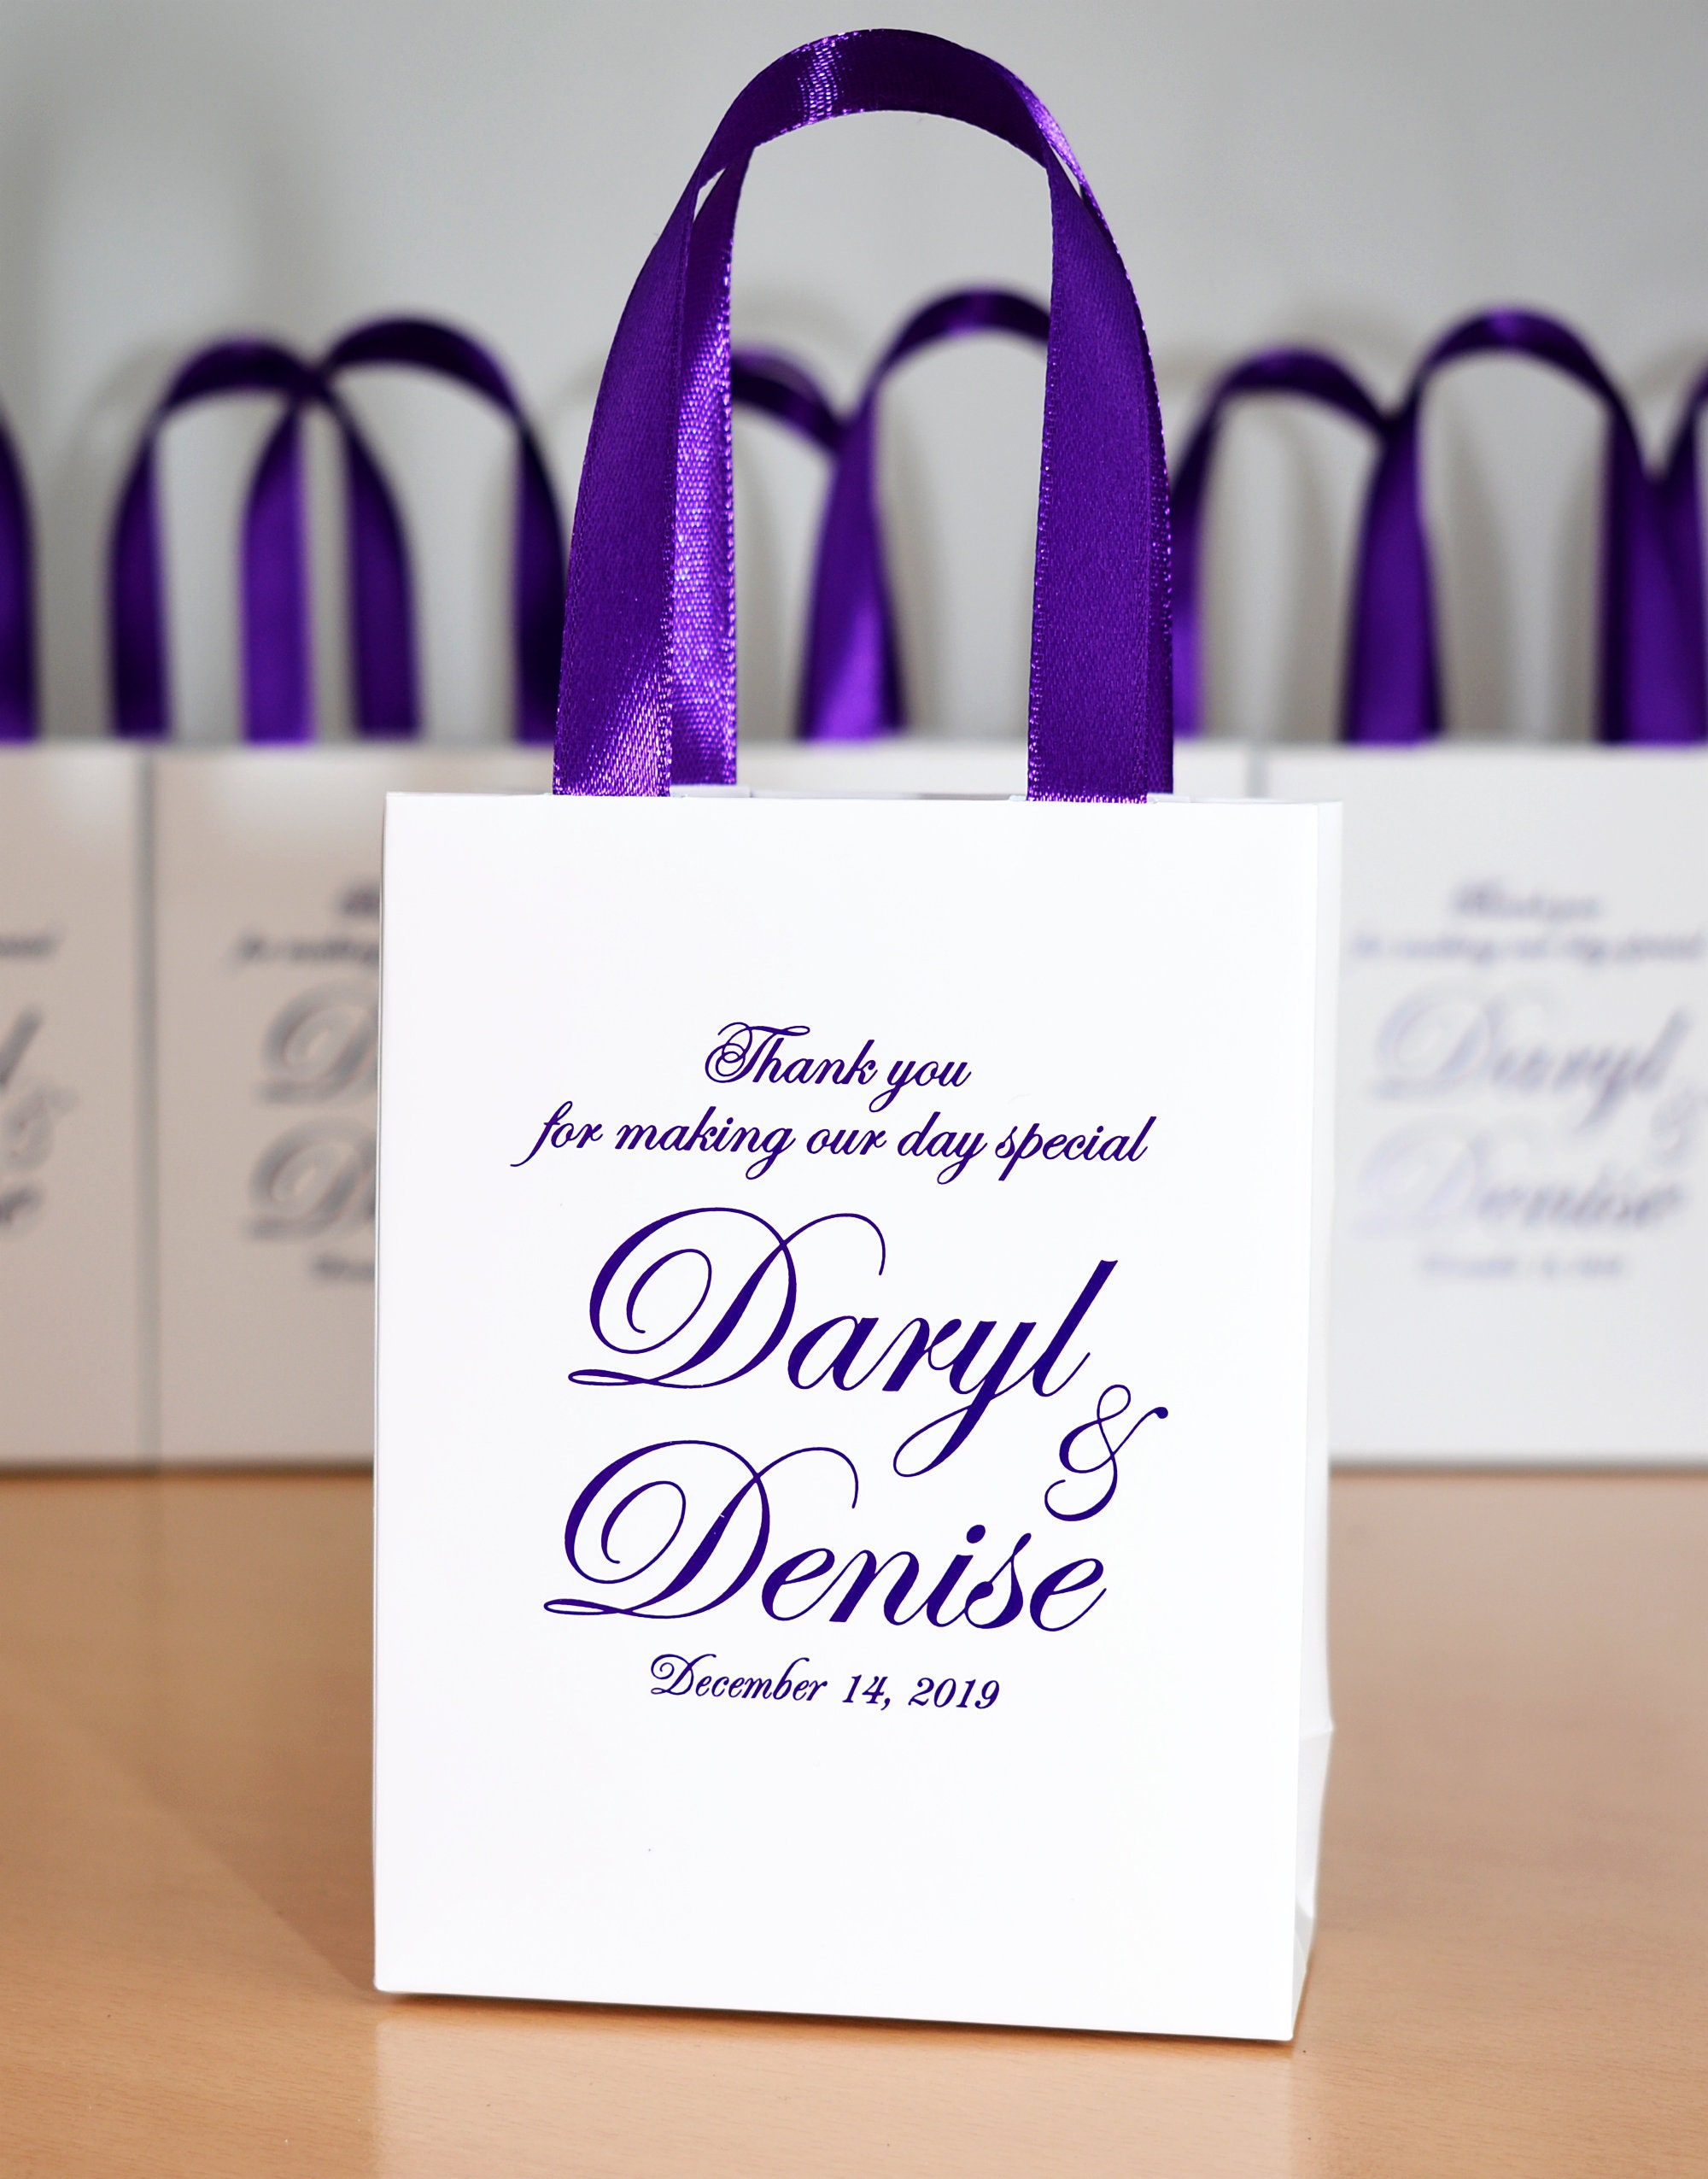 25 Purple Wedding Welcome bags for favor for guests Elegant | Etsy